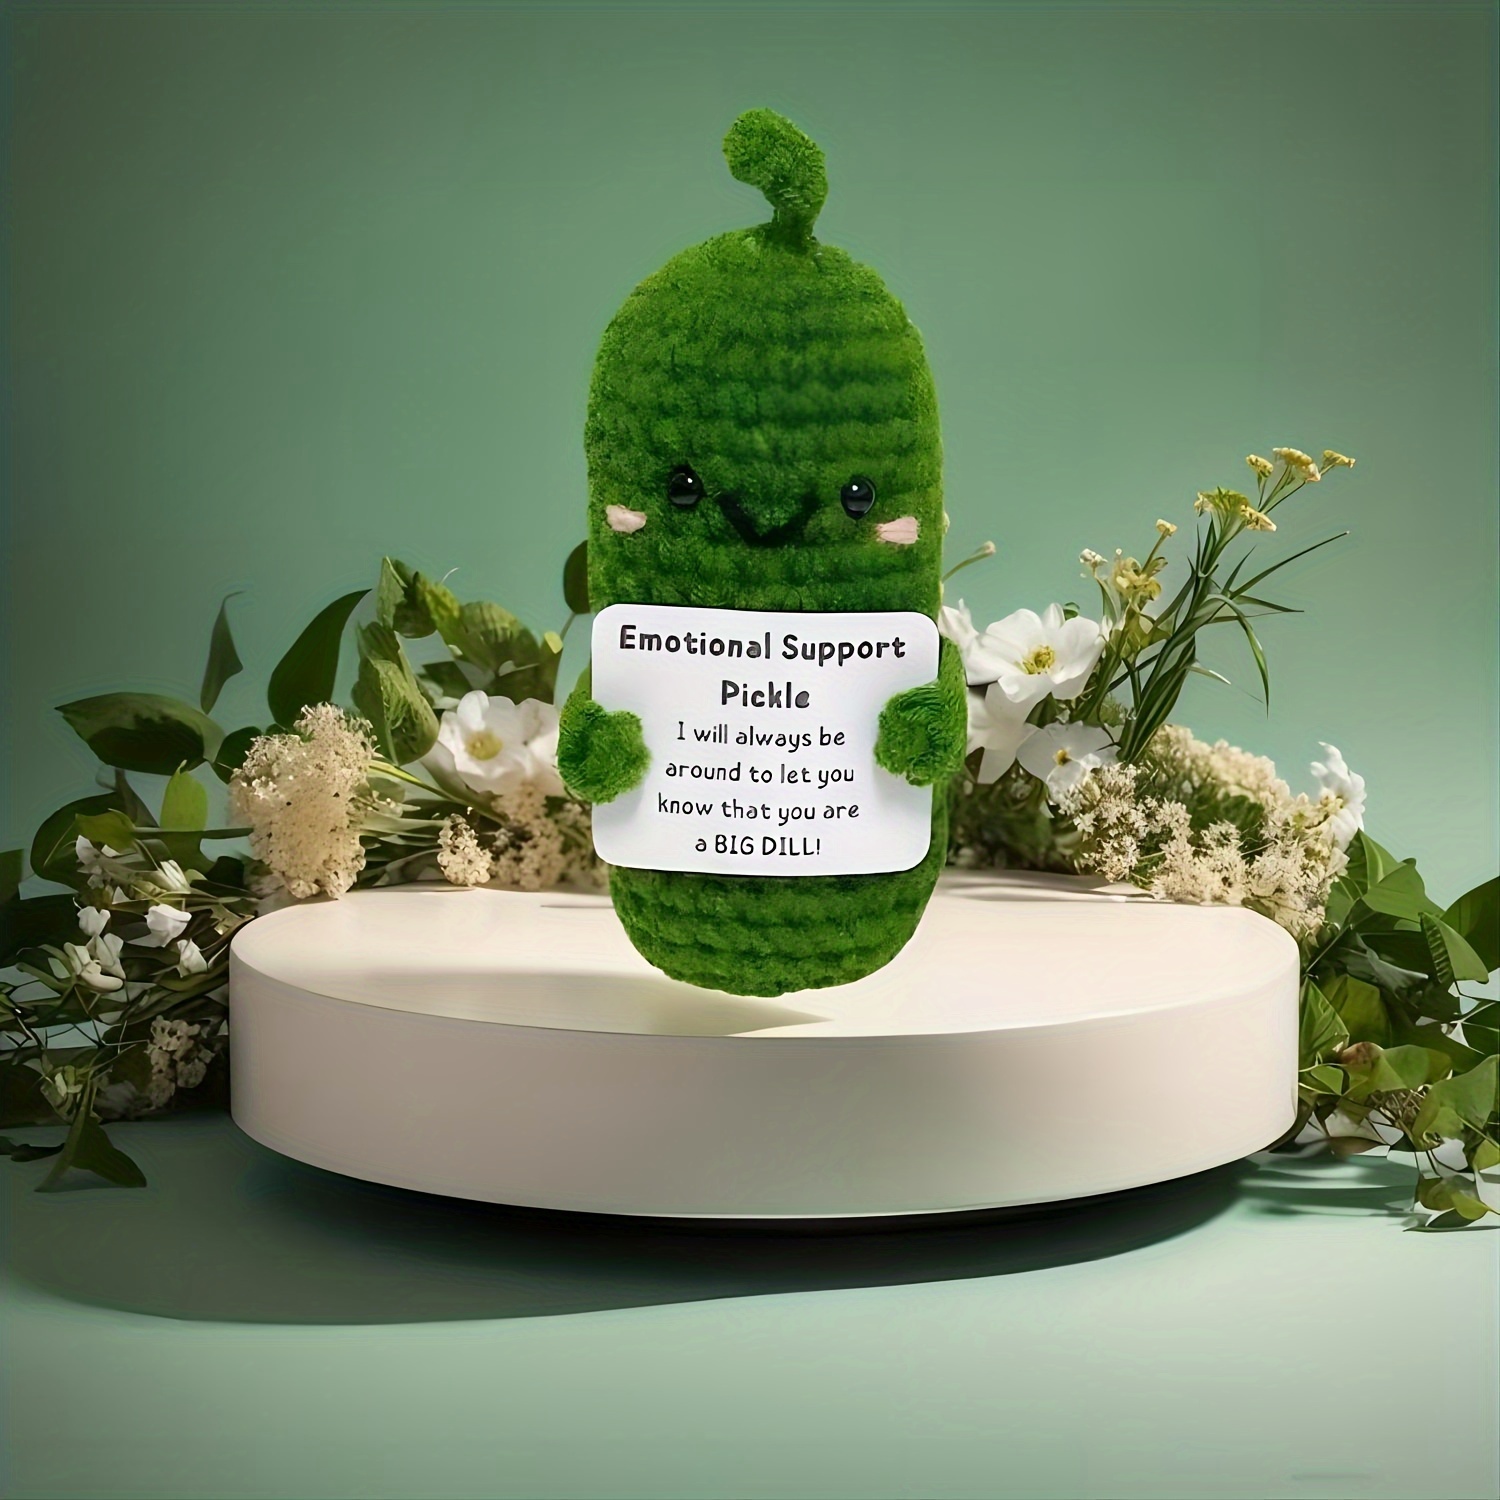 Handmade Emotional Support Pickled Cucumber Gift - Sunleny